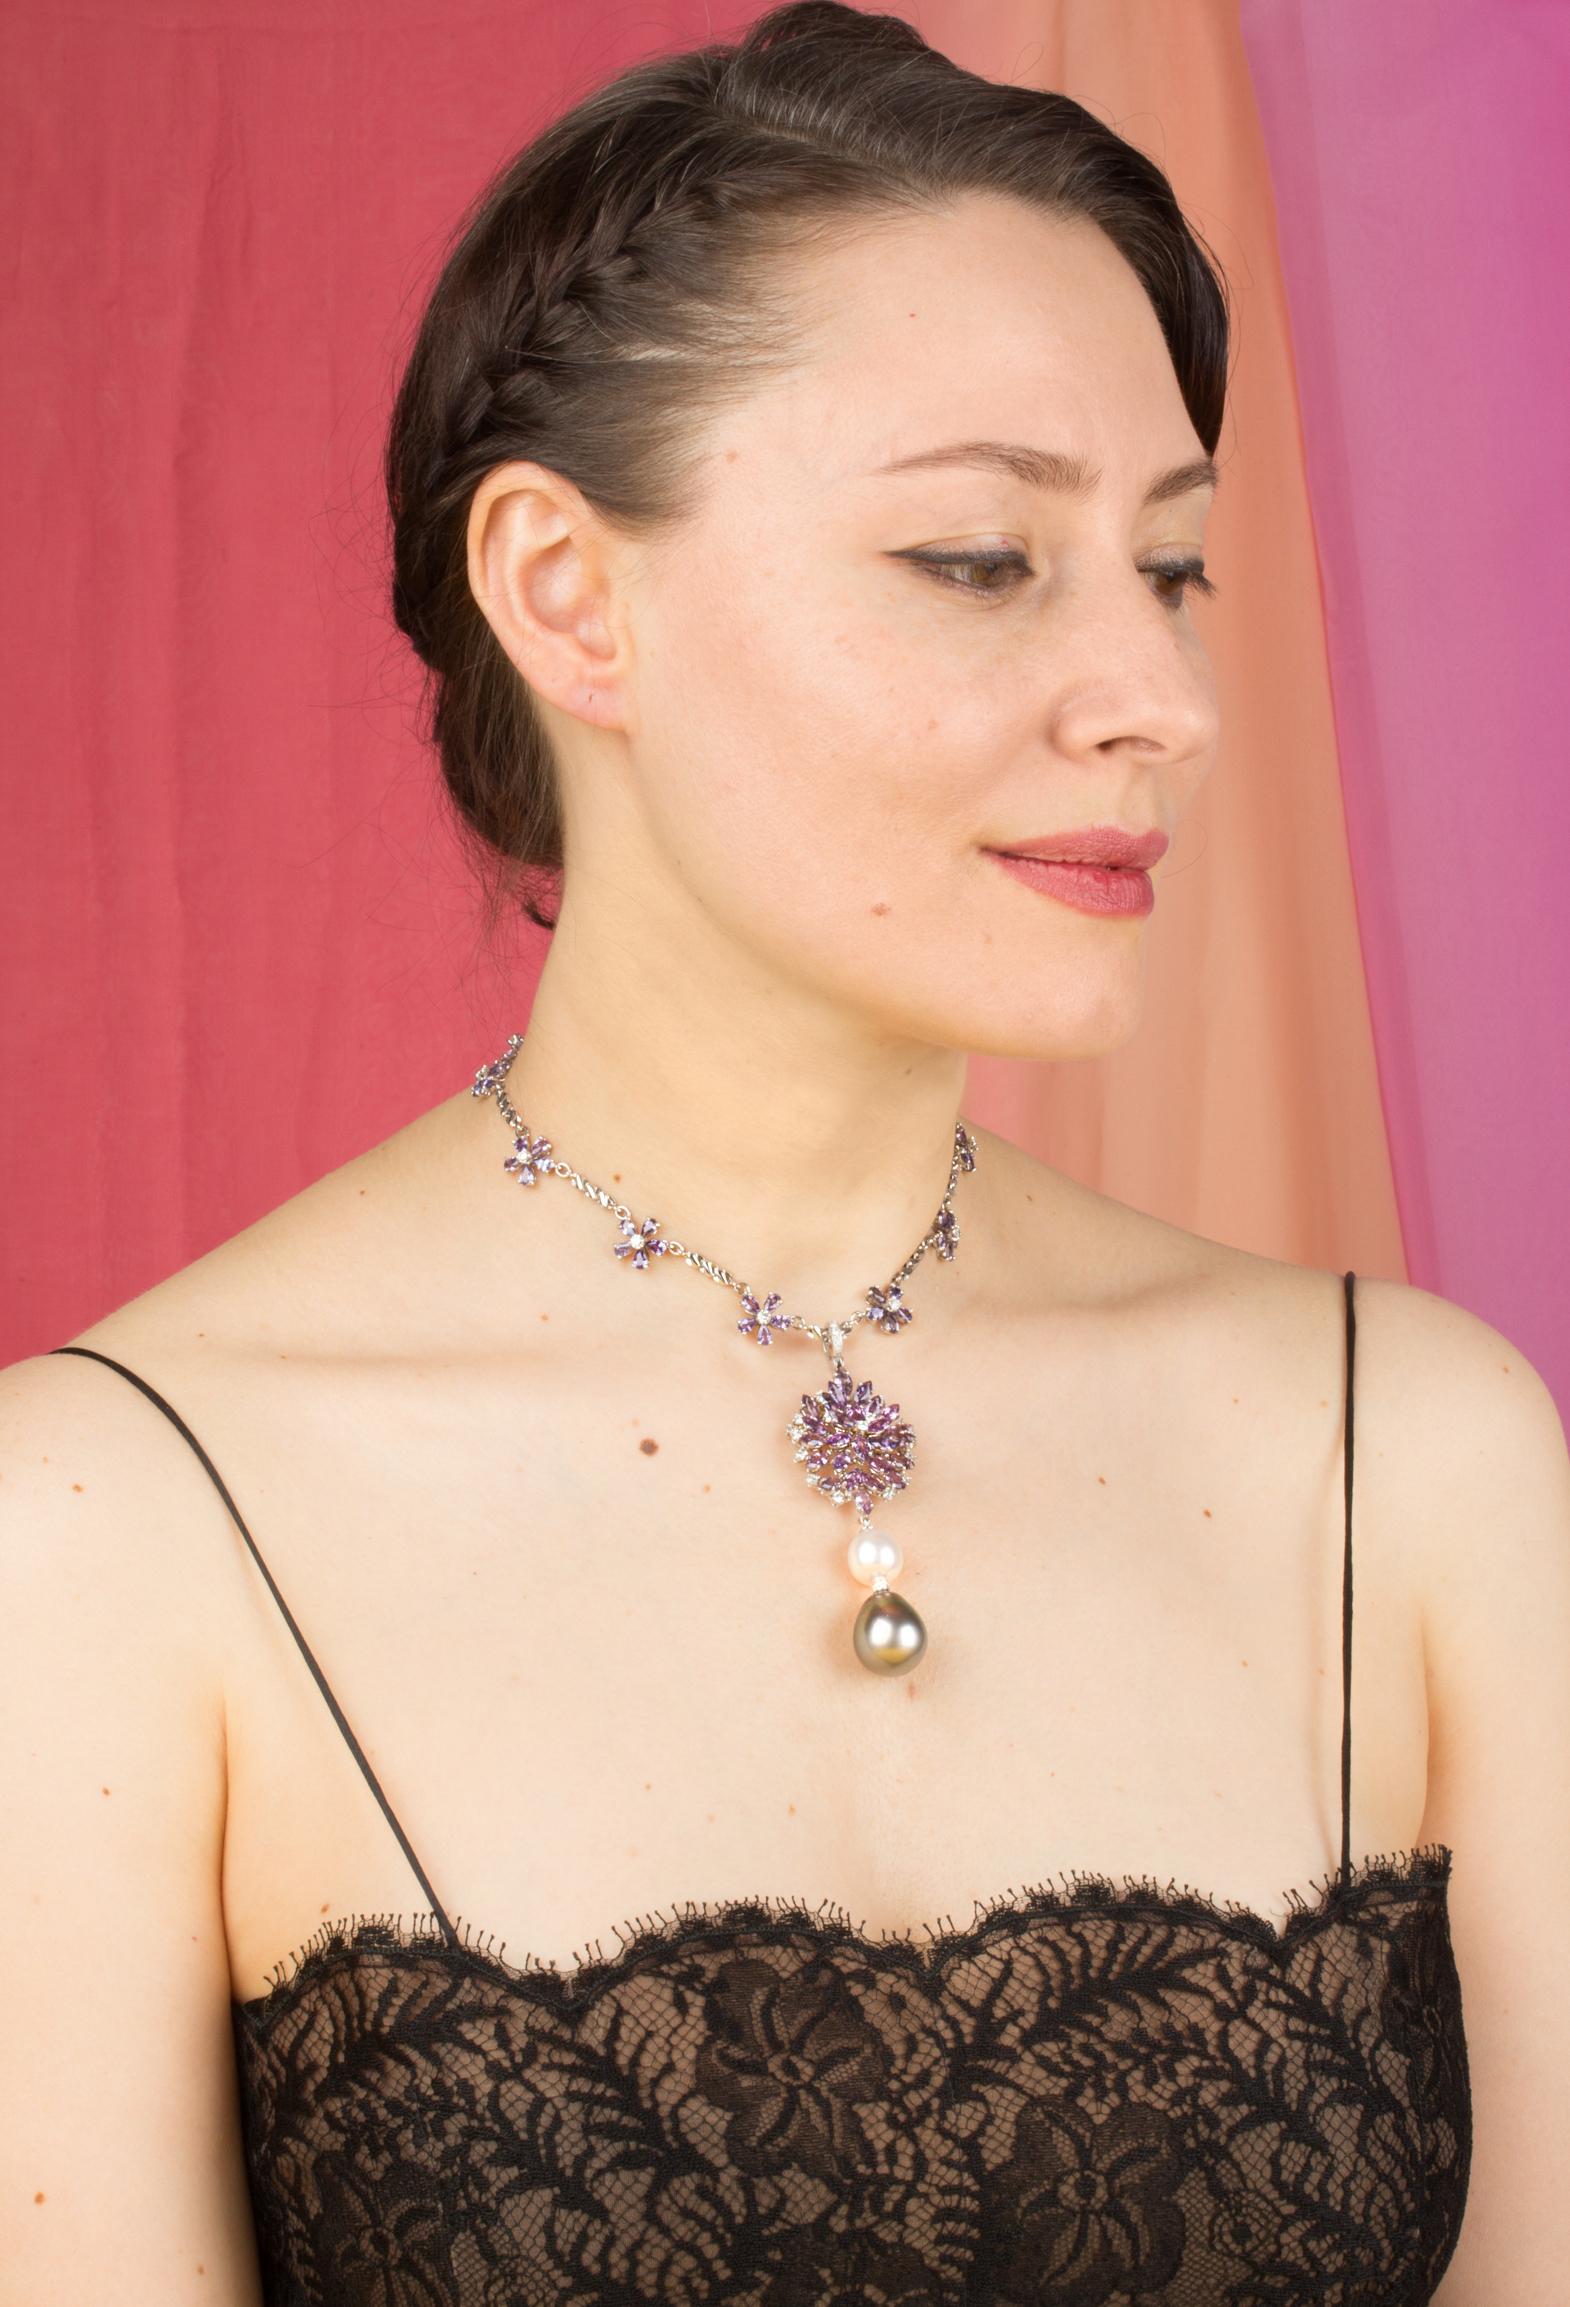 The lavender sapphire and diamond necklace features a spray of marquise shape faceted sapphires spangled with a crown of round diamonds. The jewel suspends an intermediary South Sea pearl and a Tahitian pearl of the rare size of 19 x 16mm. The 3.25”